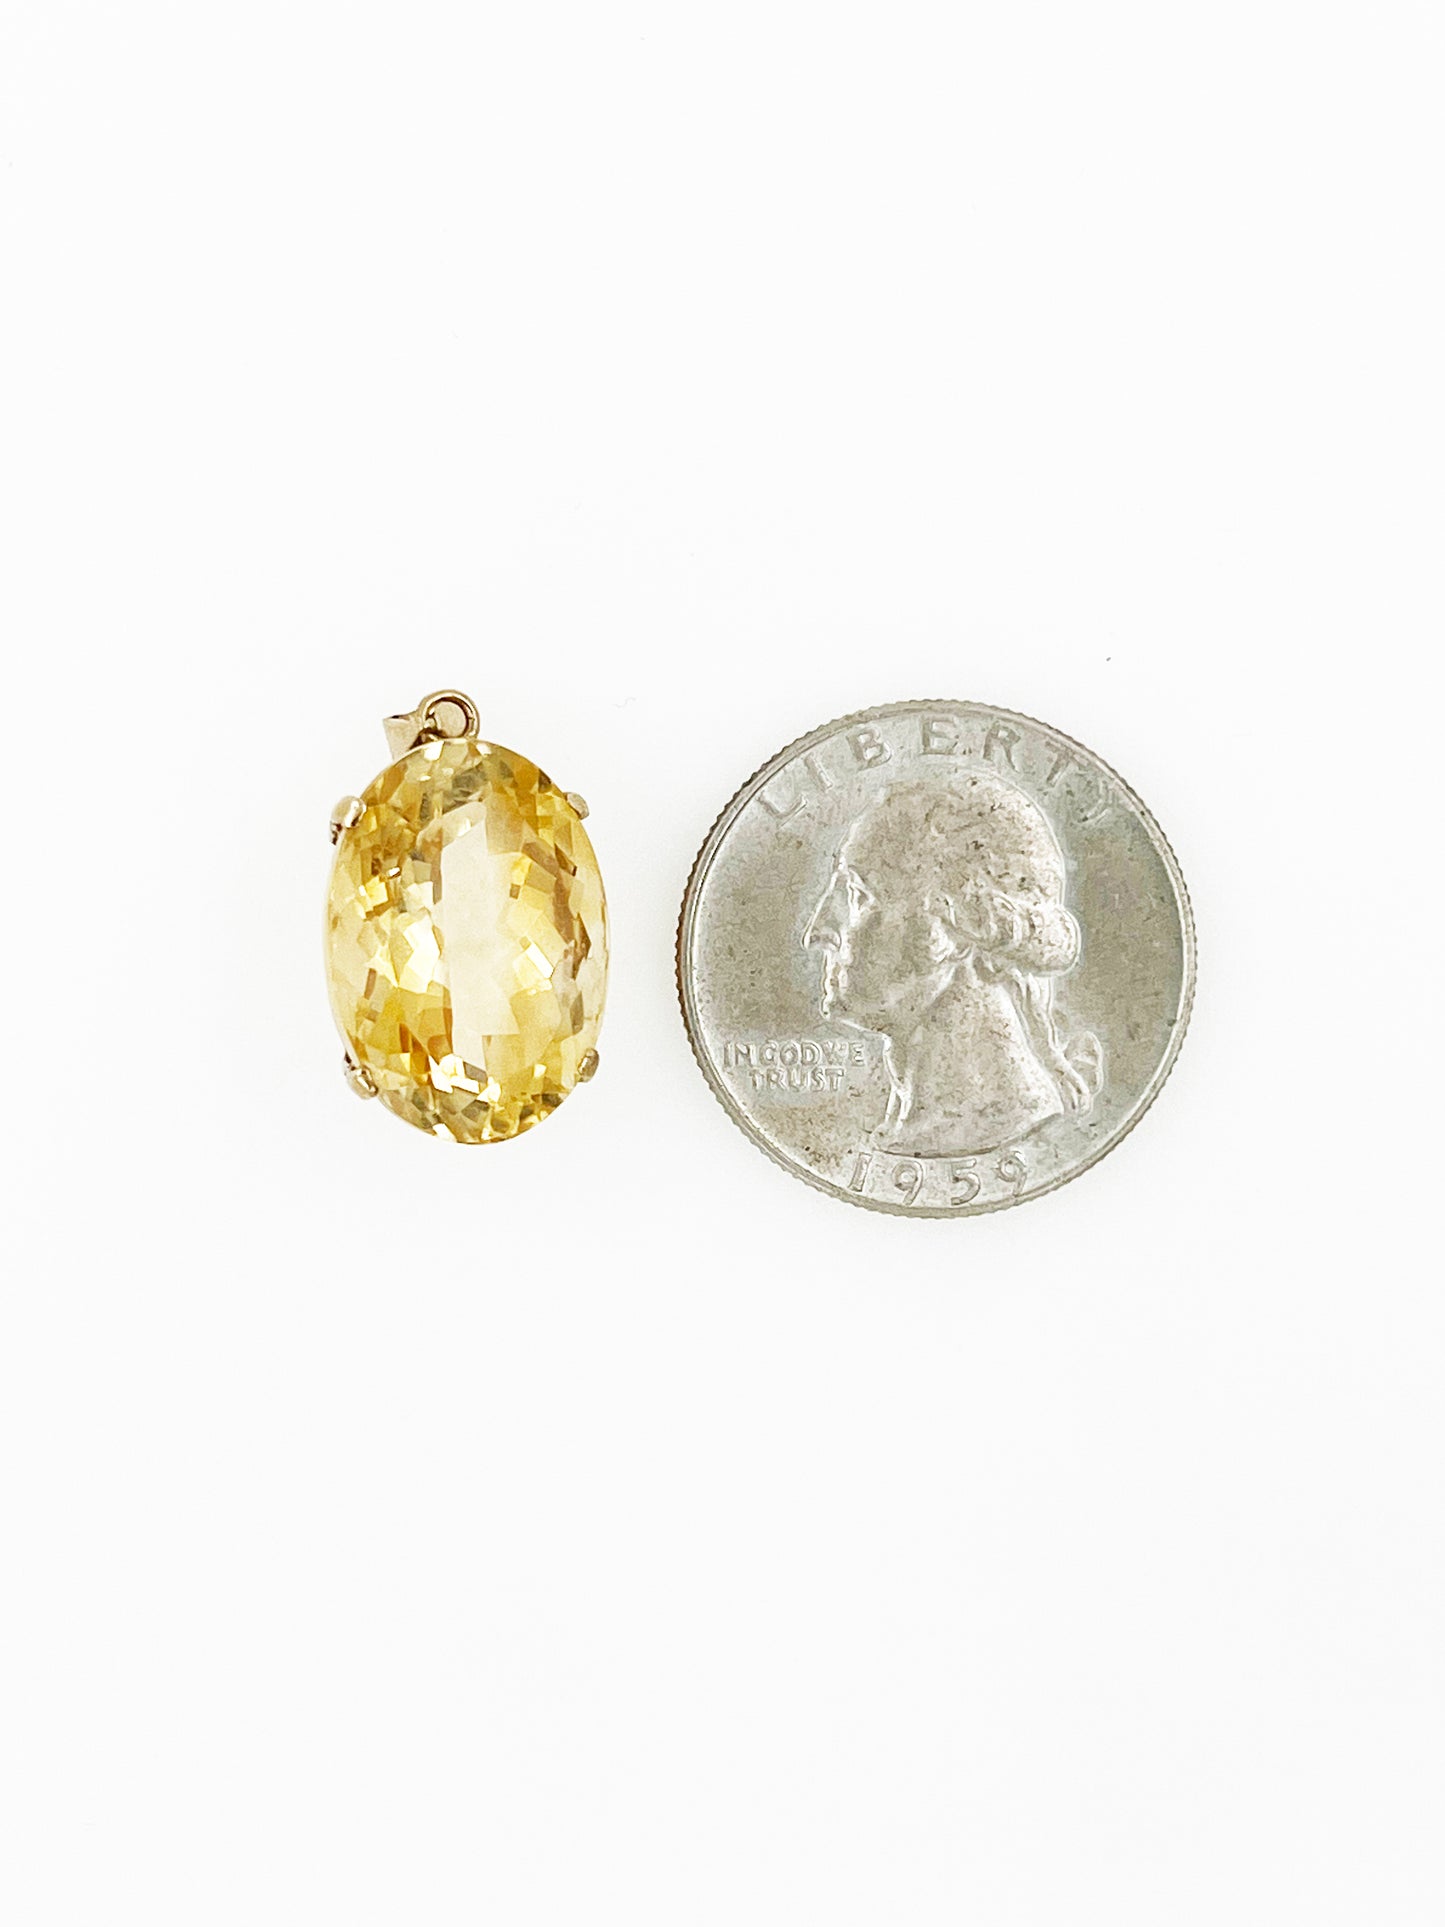 Vintage Oval Citrine Pendant in 10k Yellow Gold